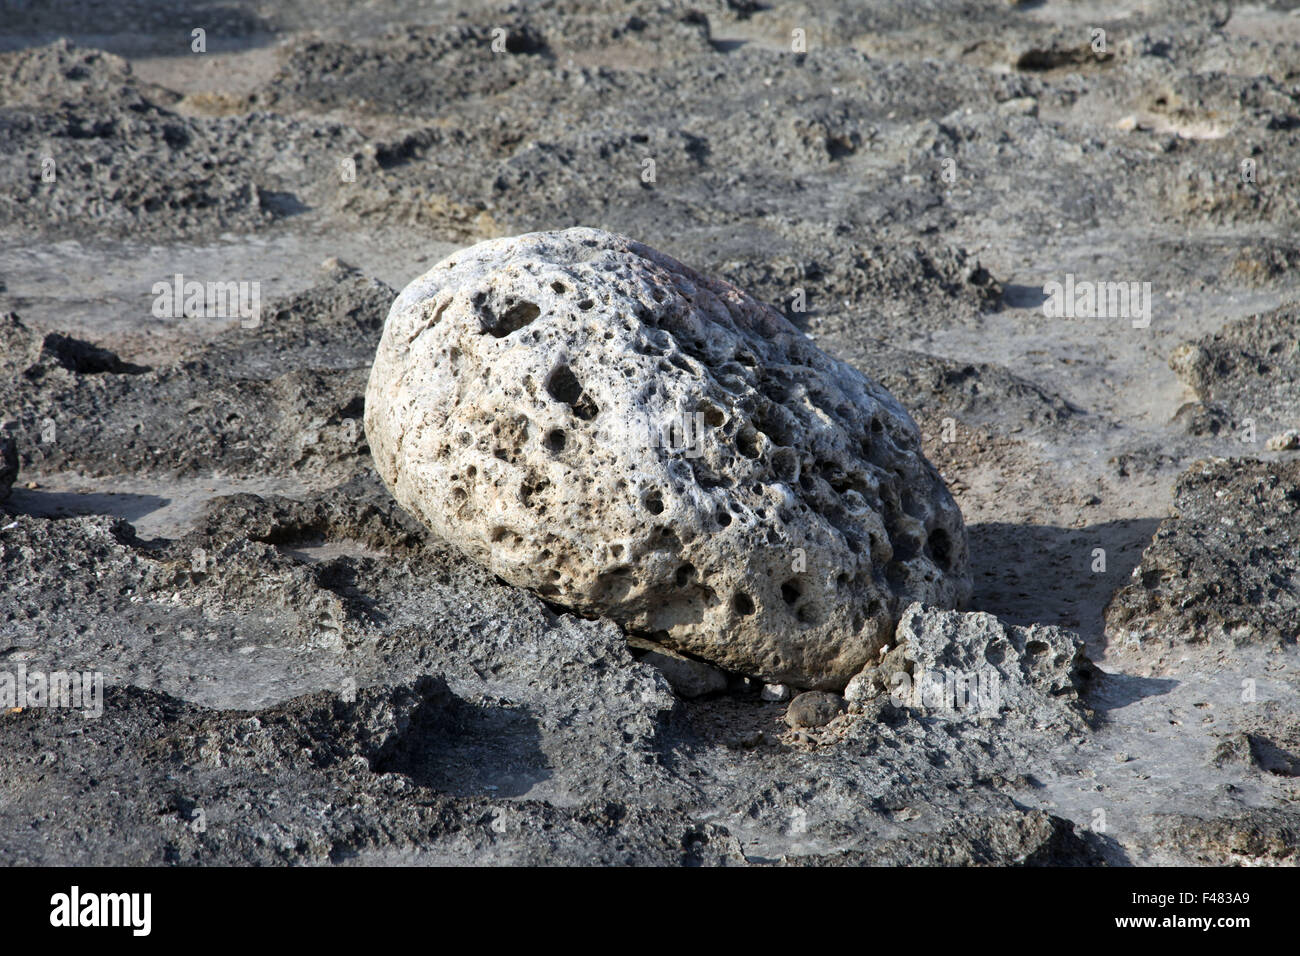 It's a photo of a lava stone in a egg shape that is on the floor or ground in Okinawa island in Japan Stock Photo